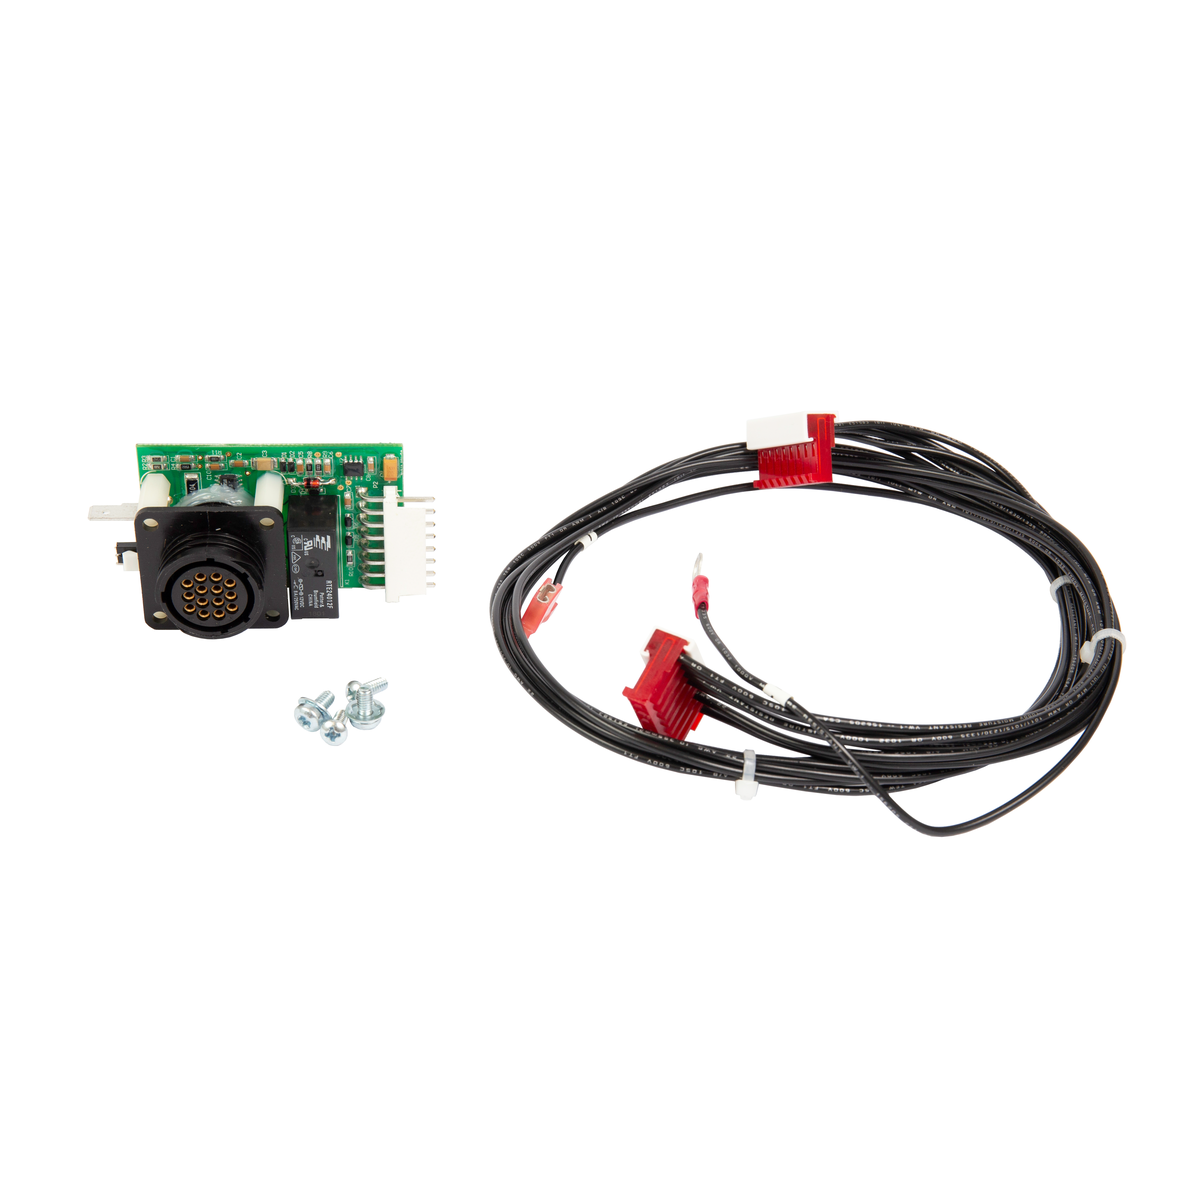 Thermal Dynamics Cutmaster Automation Interface Kit - 9-8311